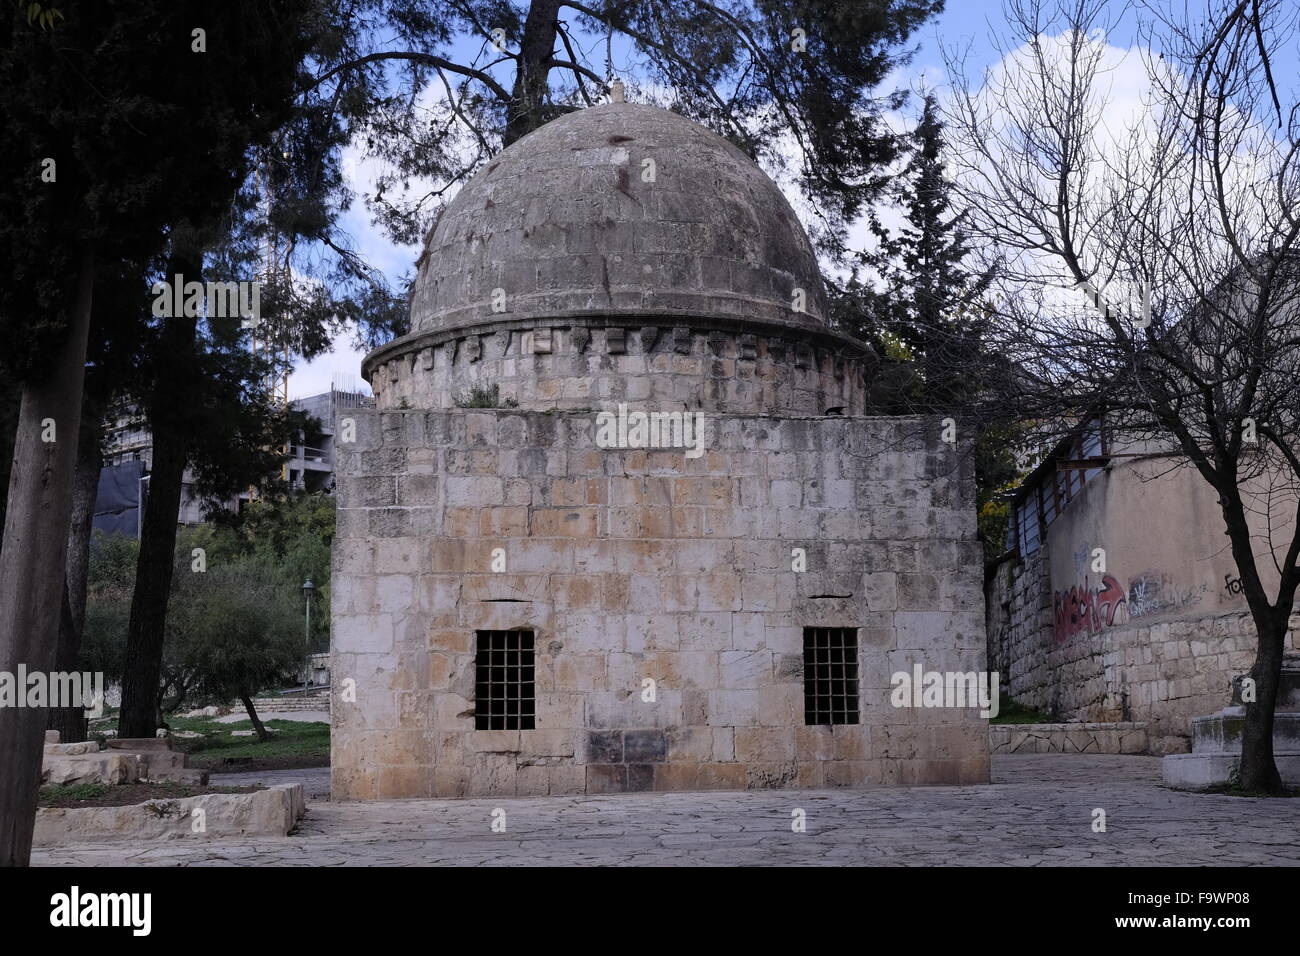 View of the Tomb of emir Aidughdi Kubaki in Mamilla Cemetery a historic Muslim cemetery located in the center of west Jerusalem Israel. The cemetery contains the remains of figures from the early Islamic period, Sufi shrines and Mamluk era tombs. Stock Photo